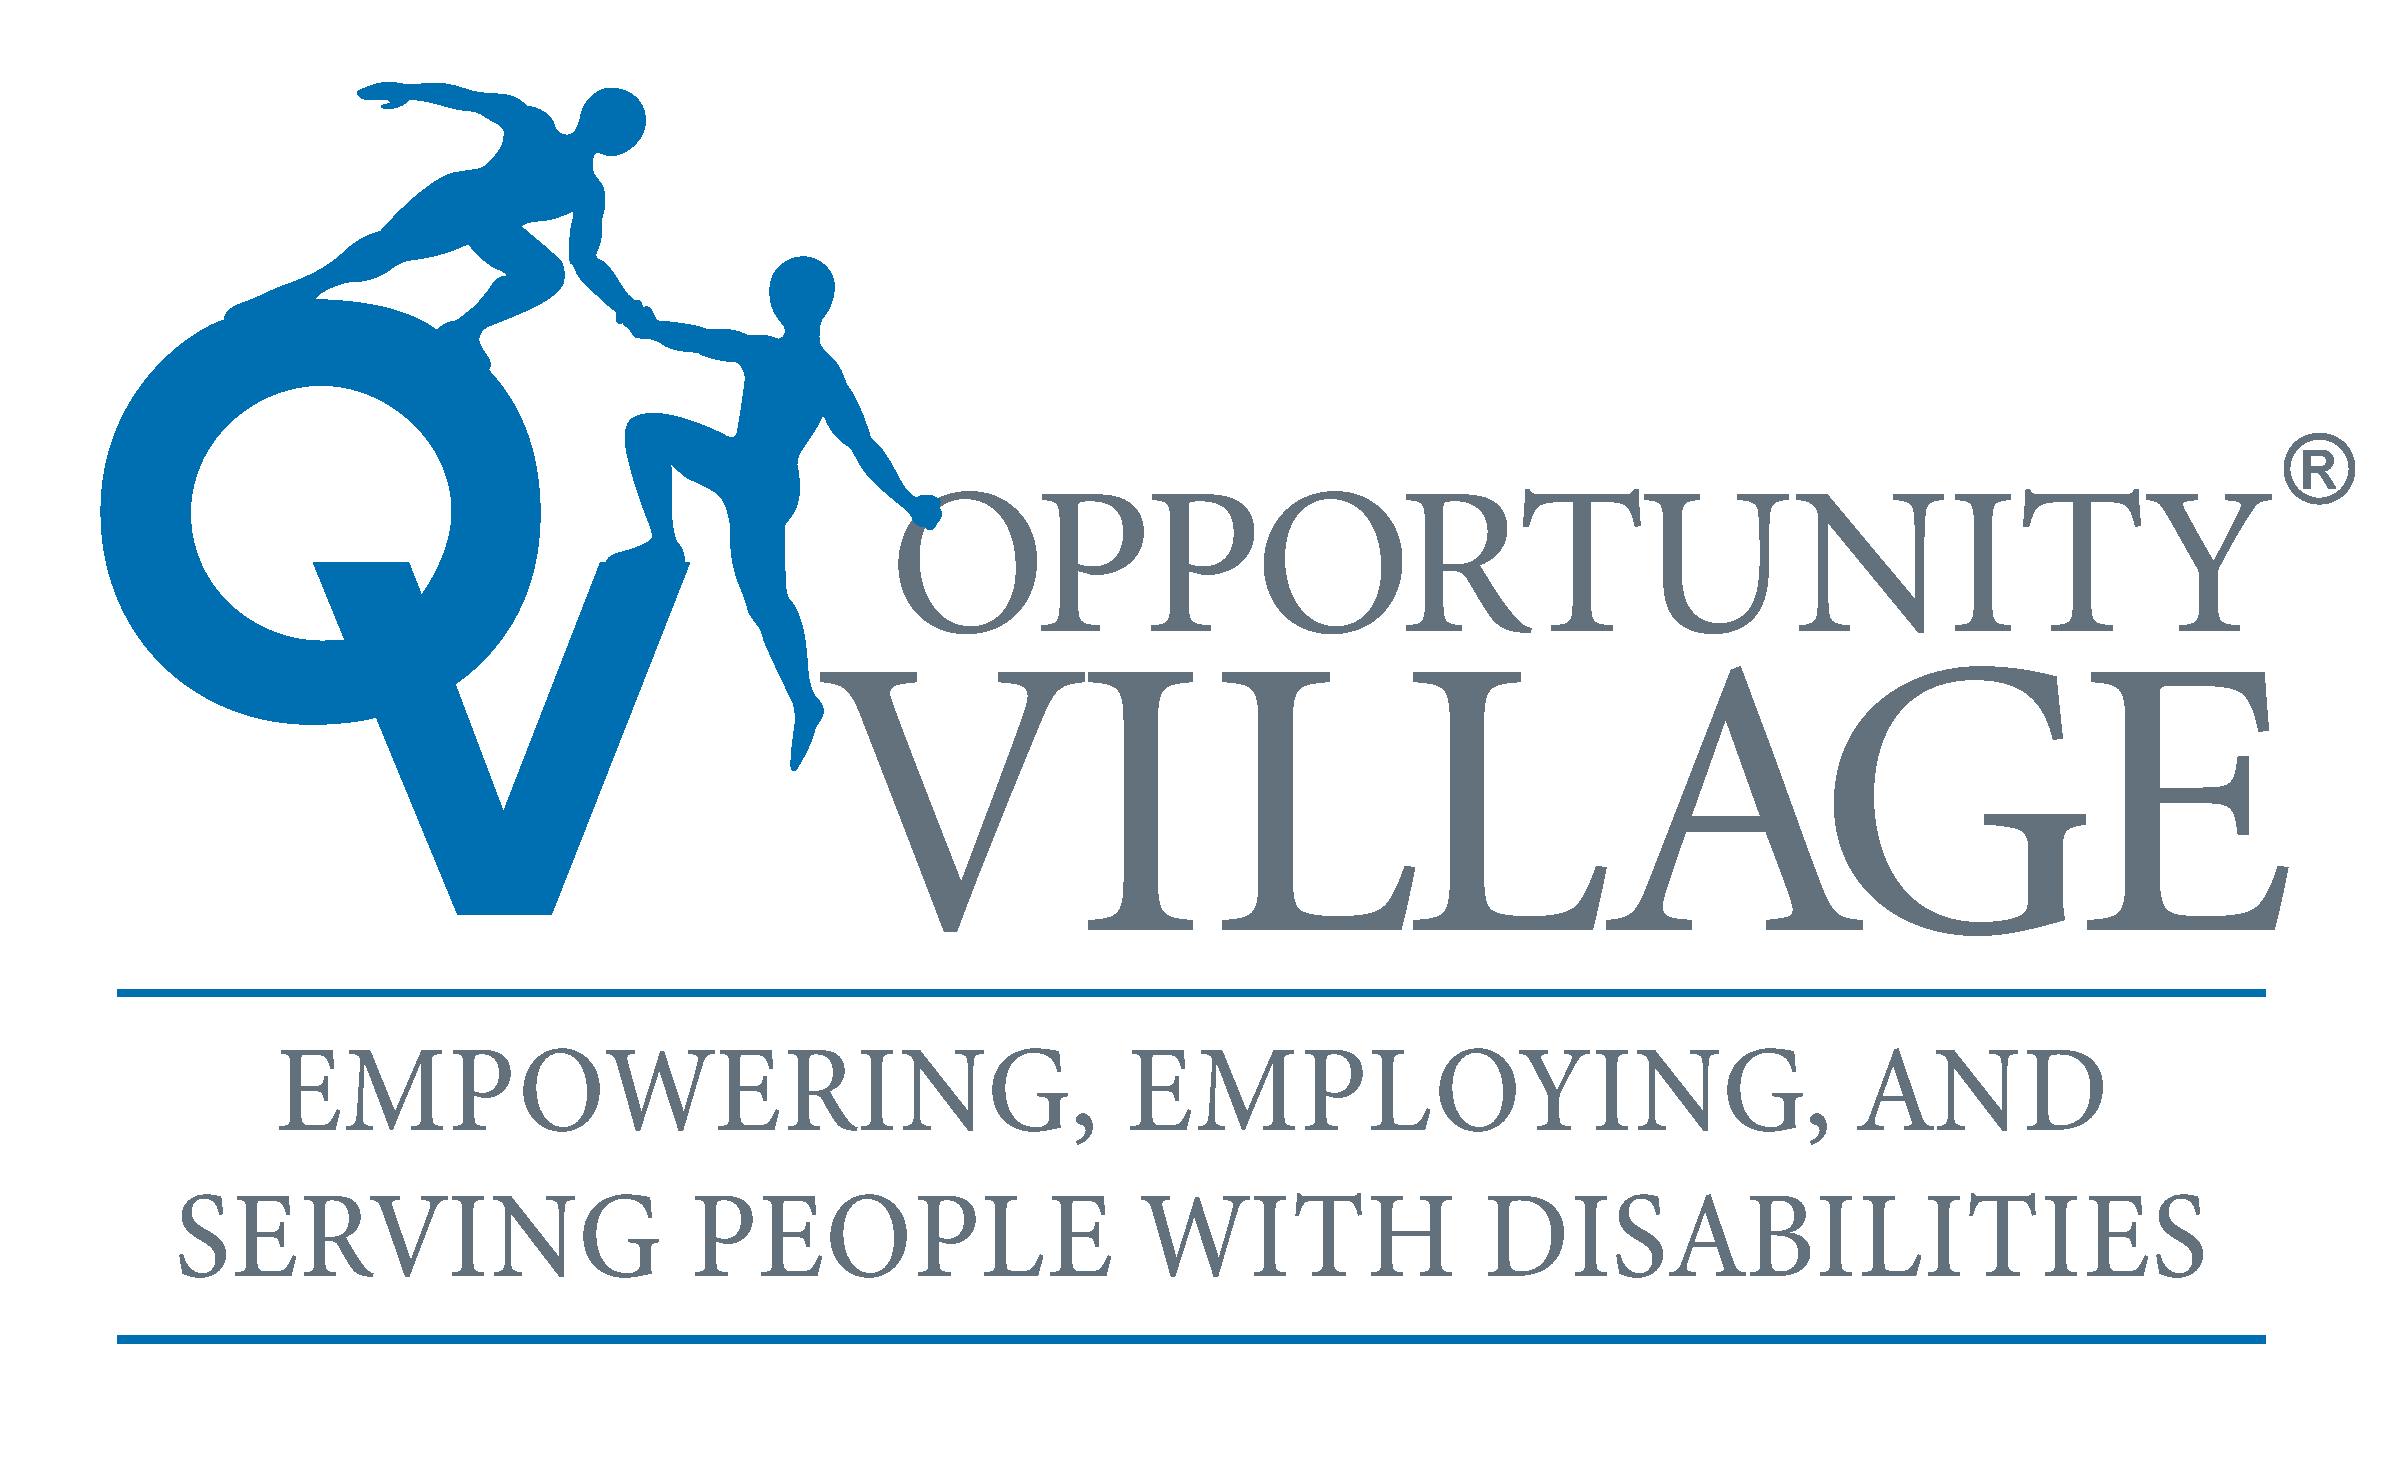 Logo for Opportunity Village with text 'empowering, employing, and serving people with disabilities'.